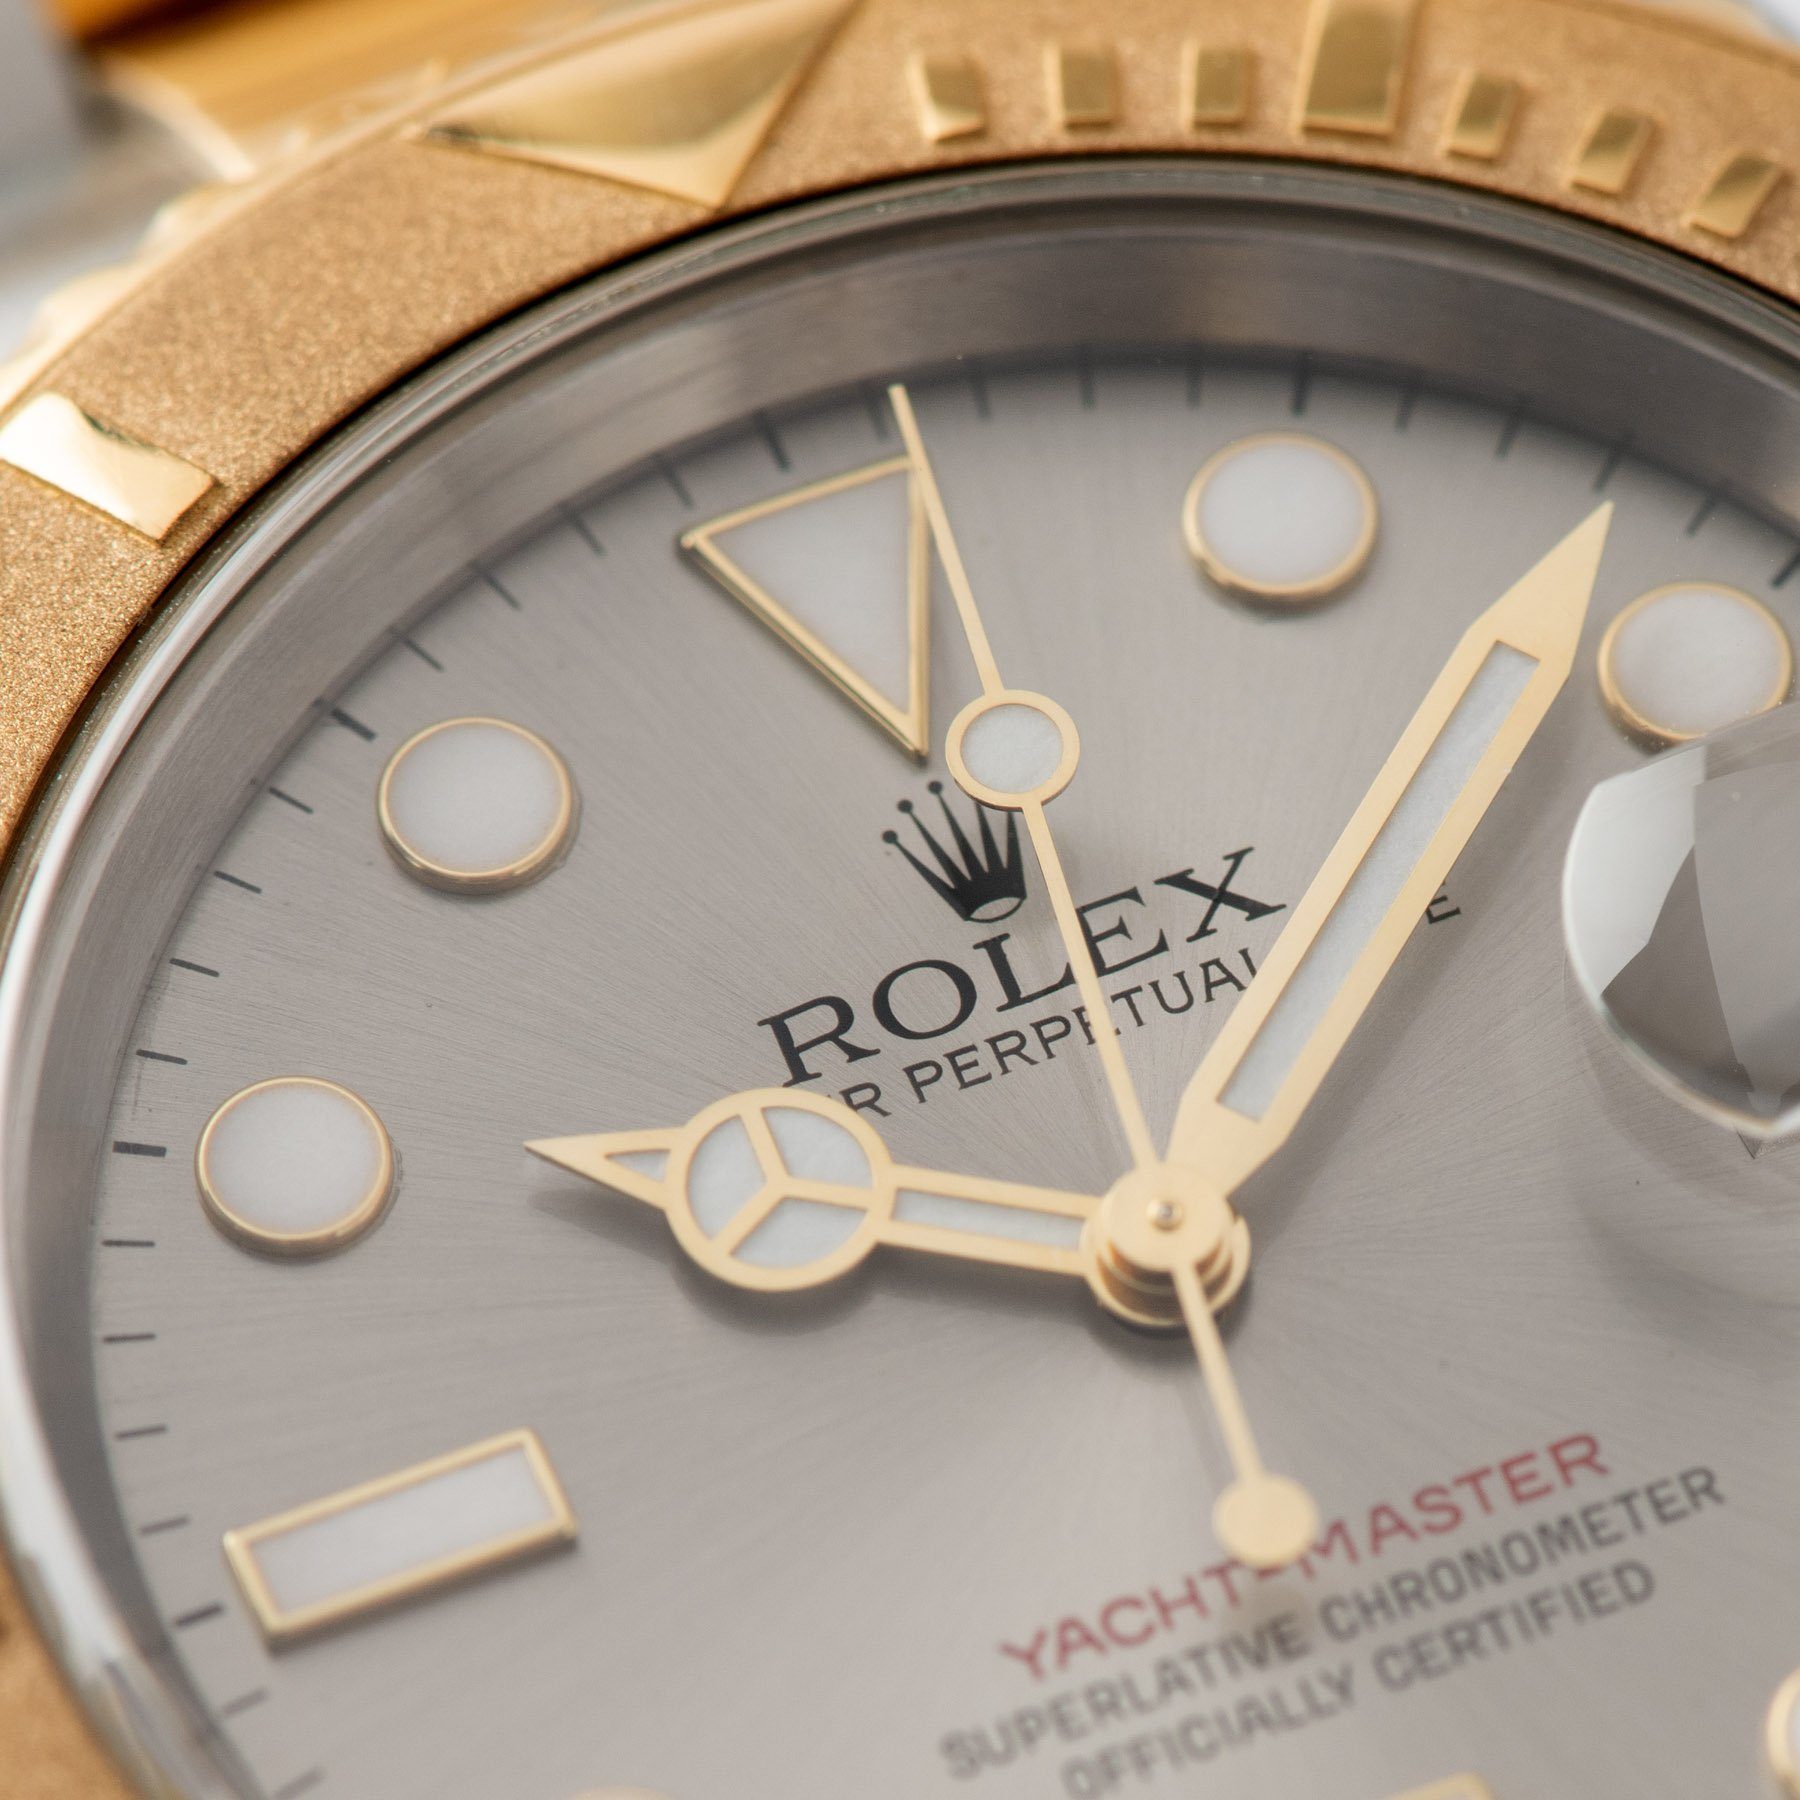 Rolex Yachtmaster Steel and Gold 16623 Grey Dial with Maxi markers